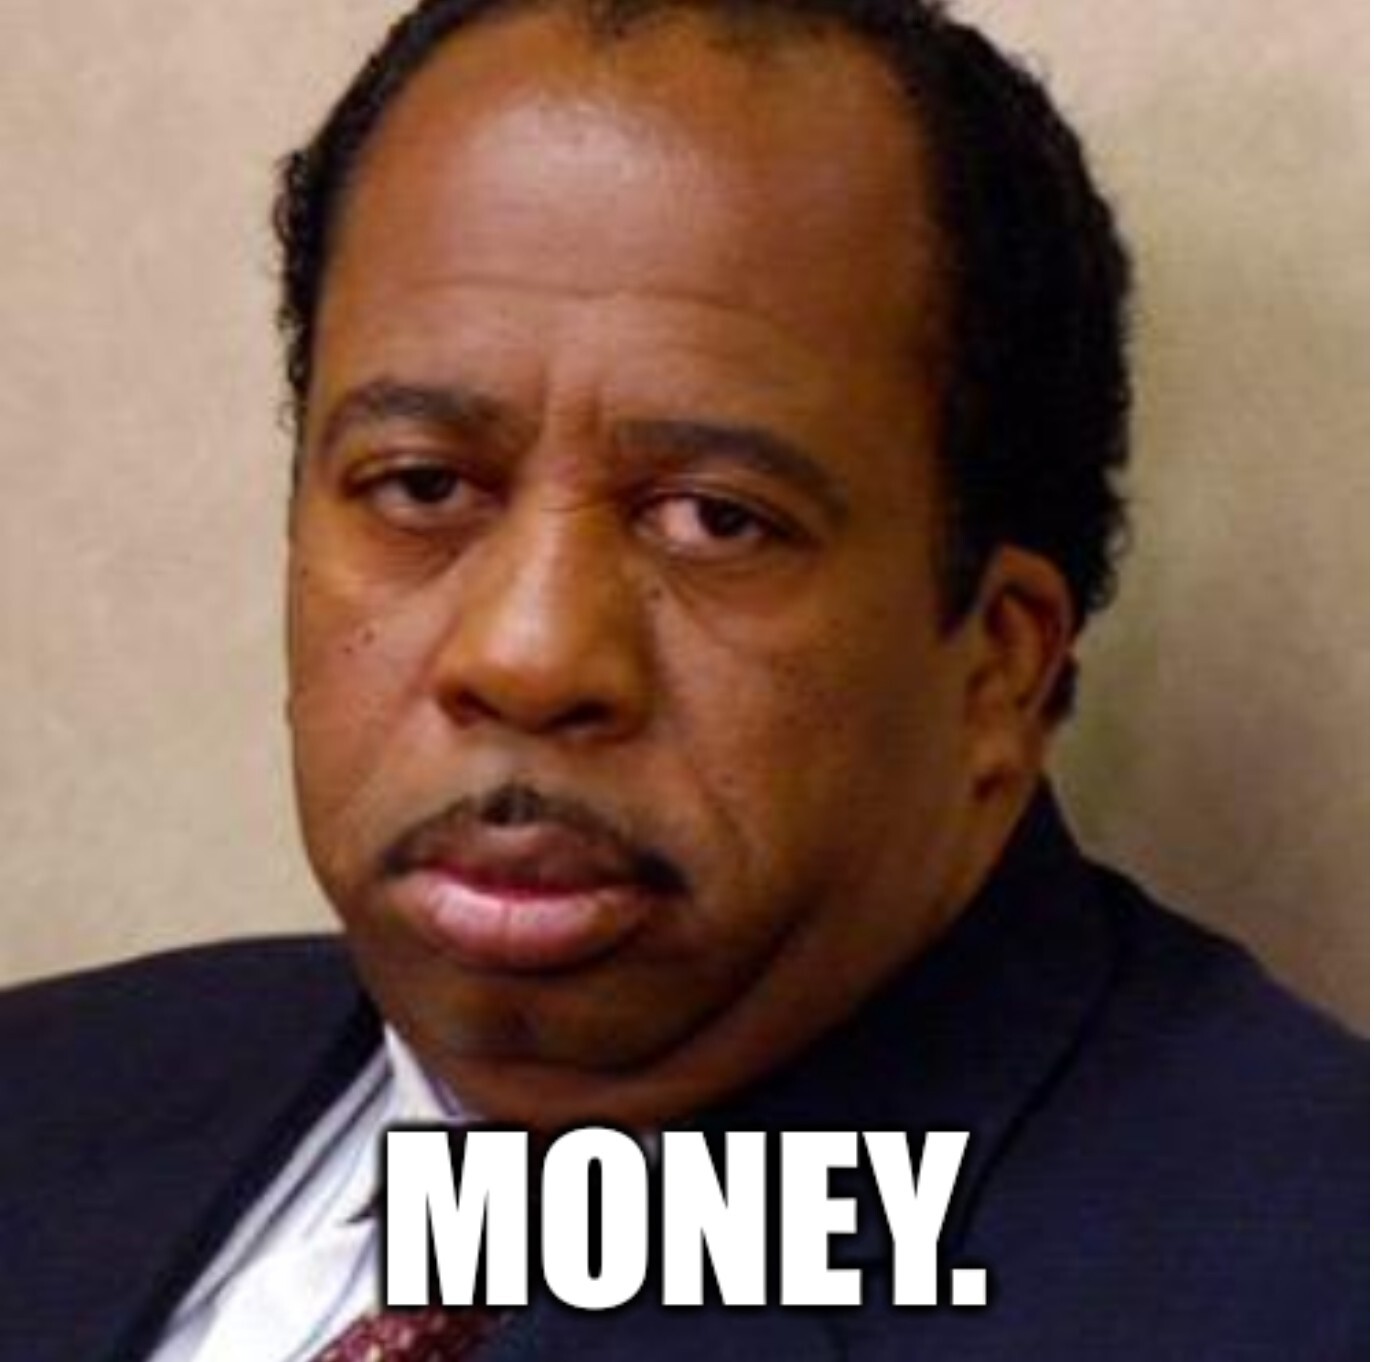 Stanley from the office with "Money" written under him.